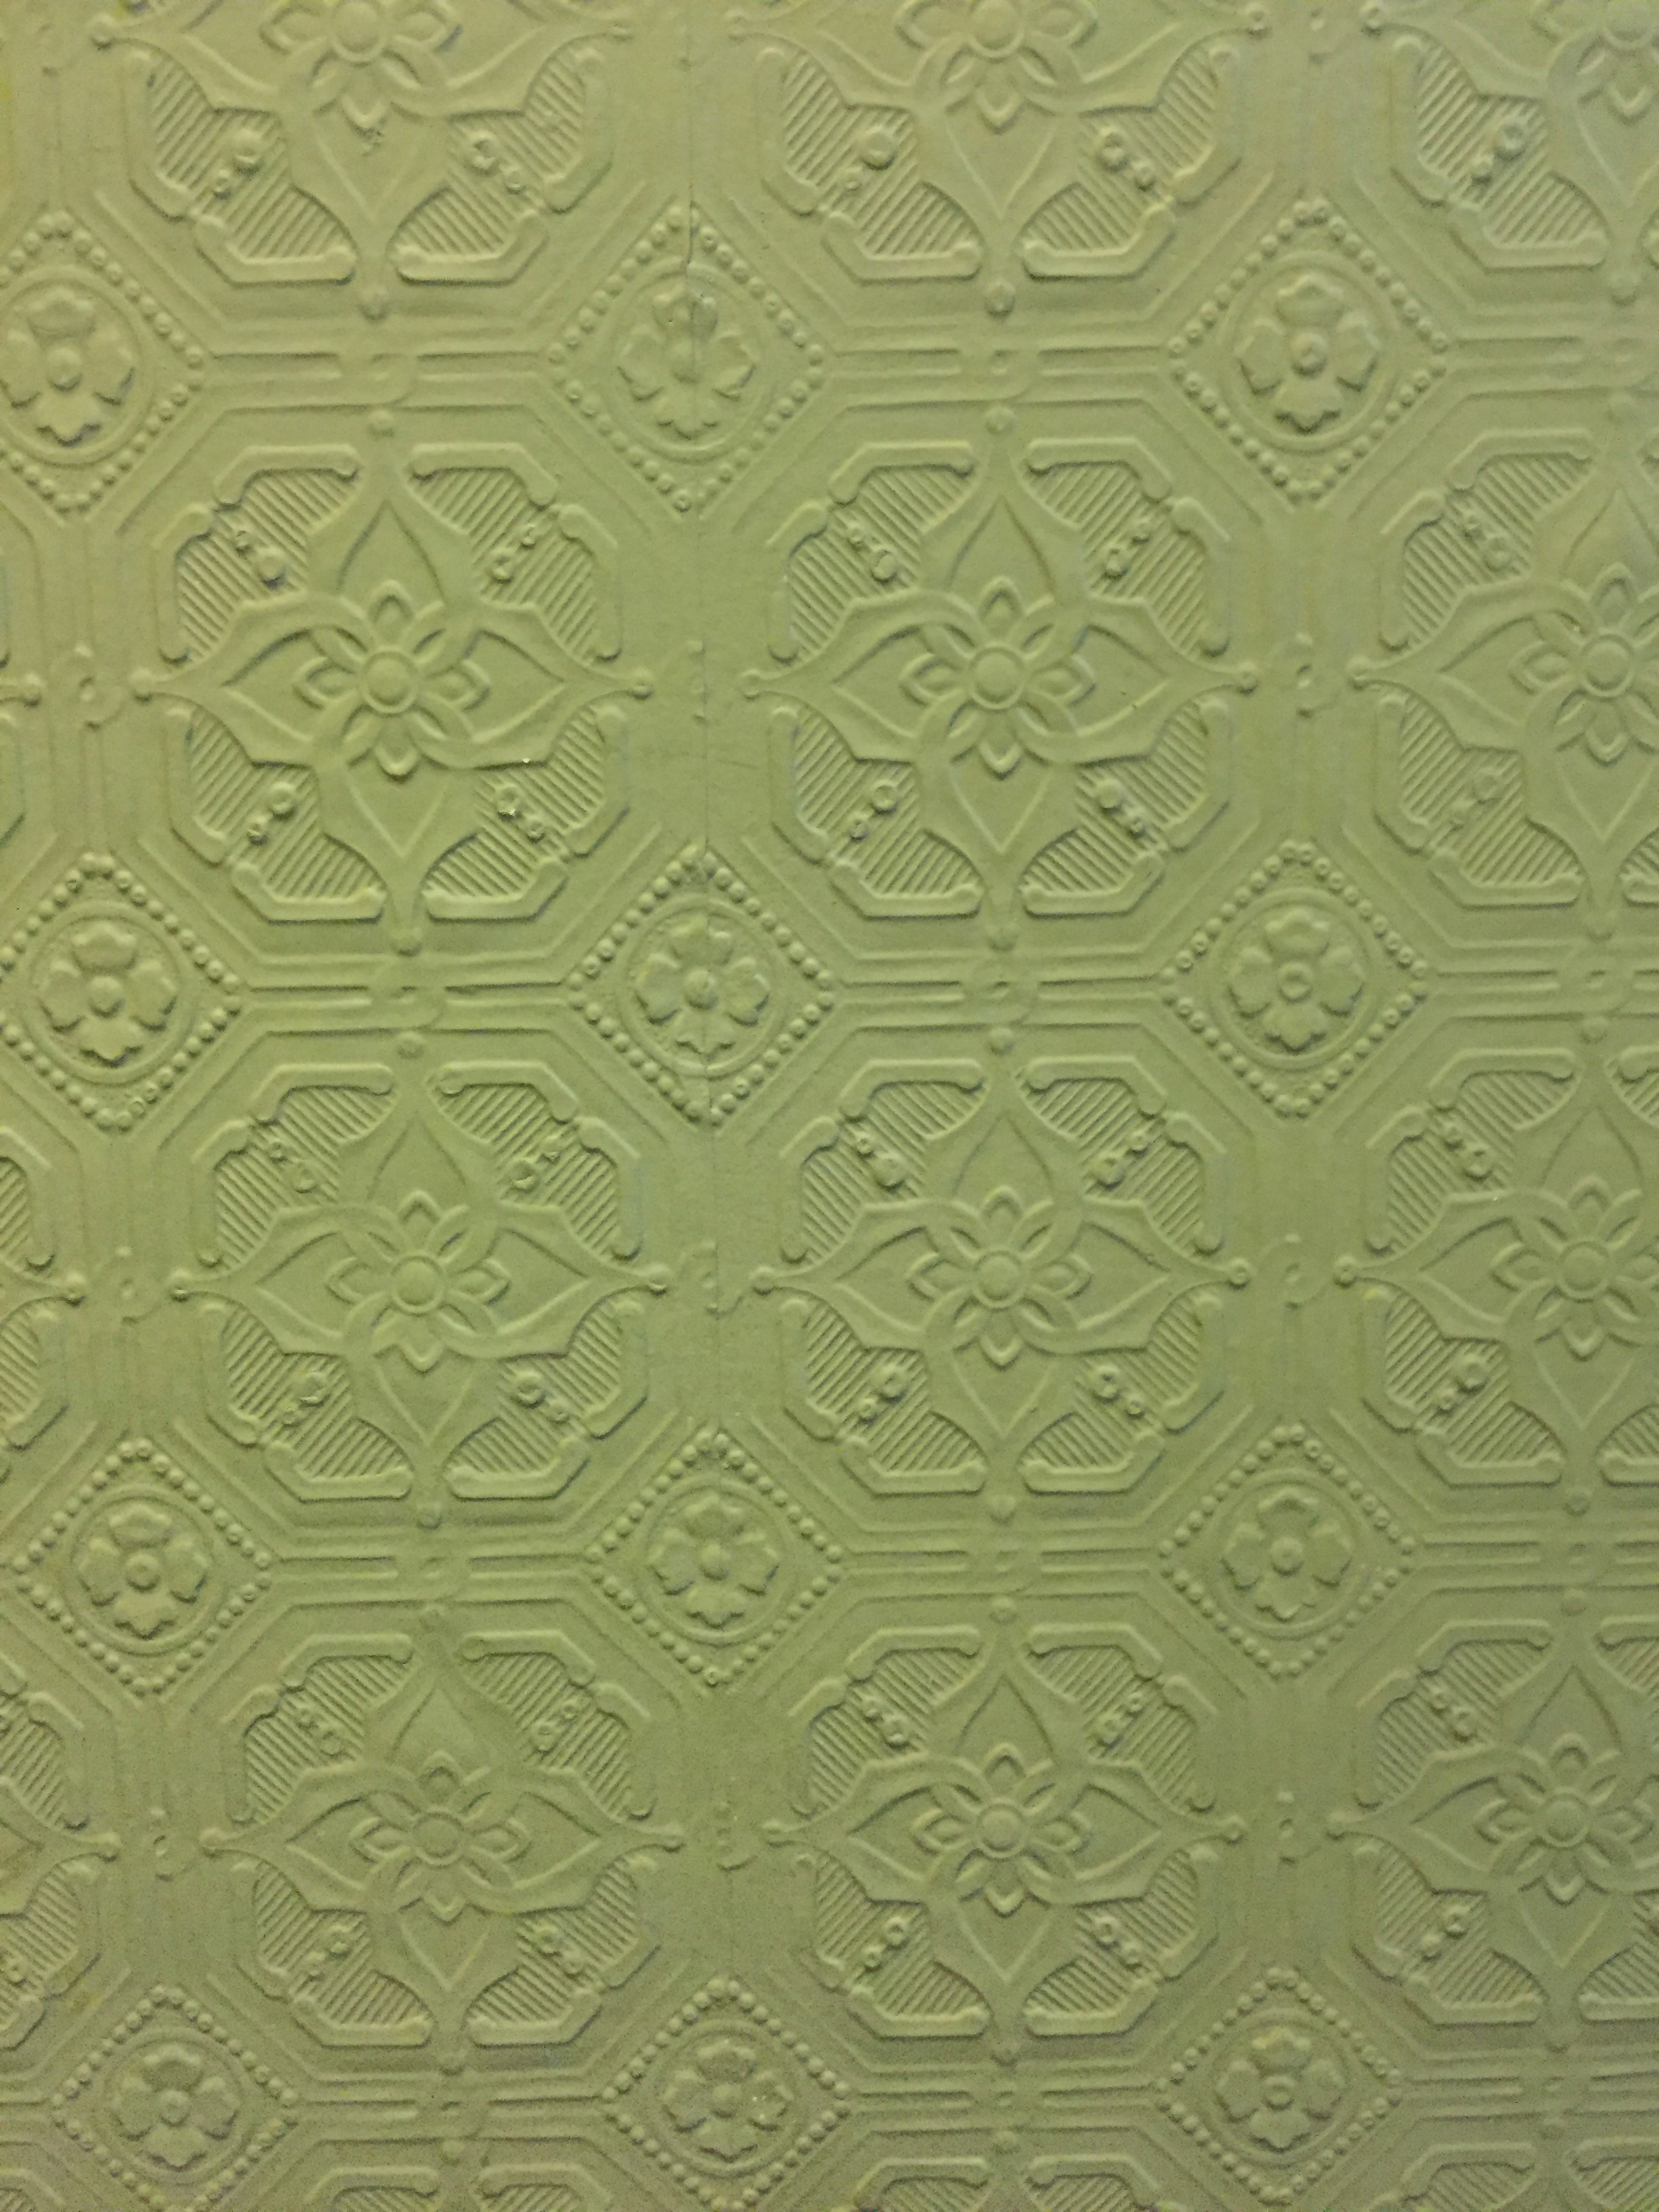 Green wall paper with ornate patterns